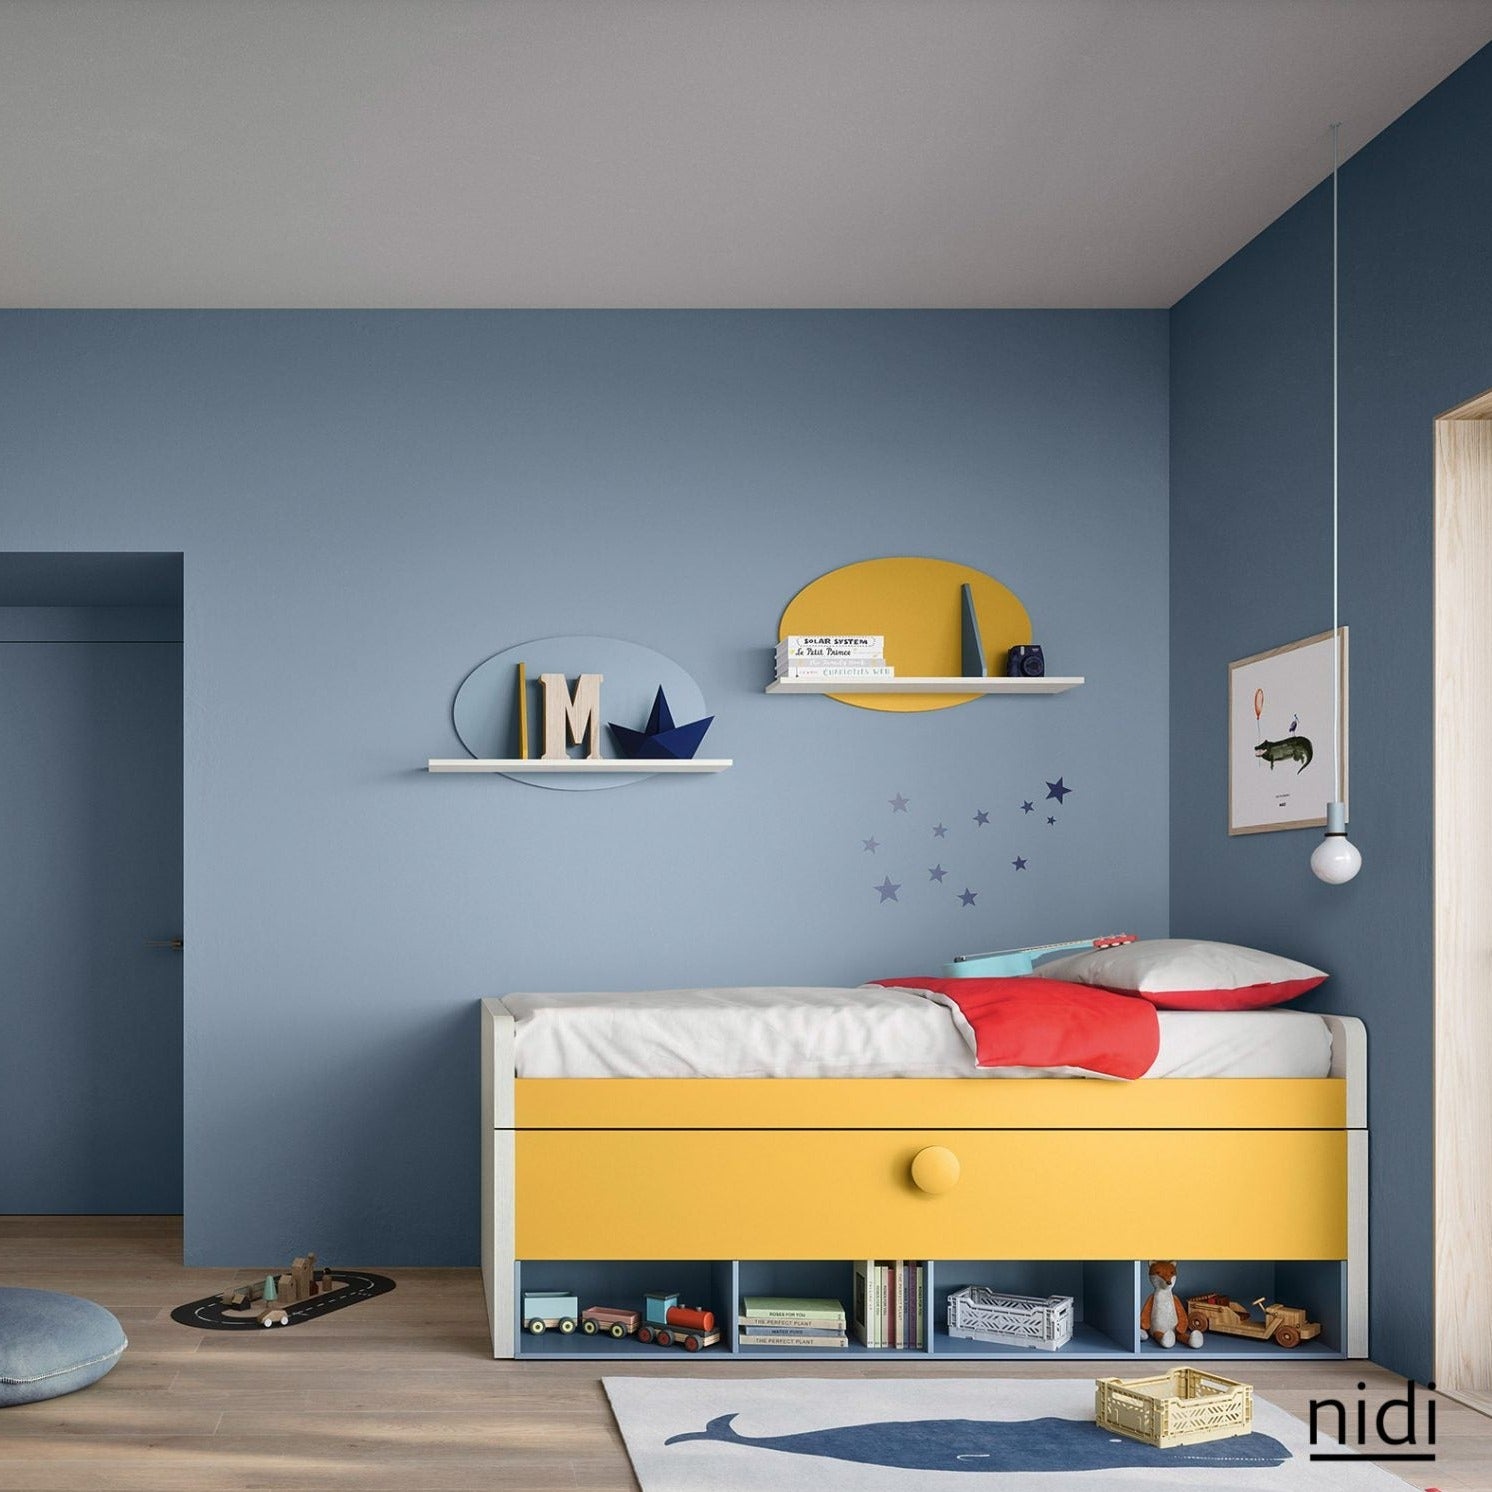 Pablo Trundle Children’s Bed by Nidi – Choice Colours